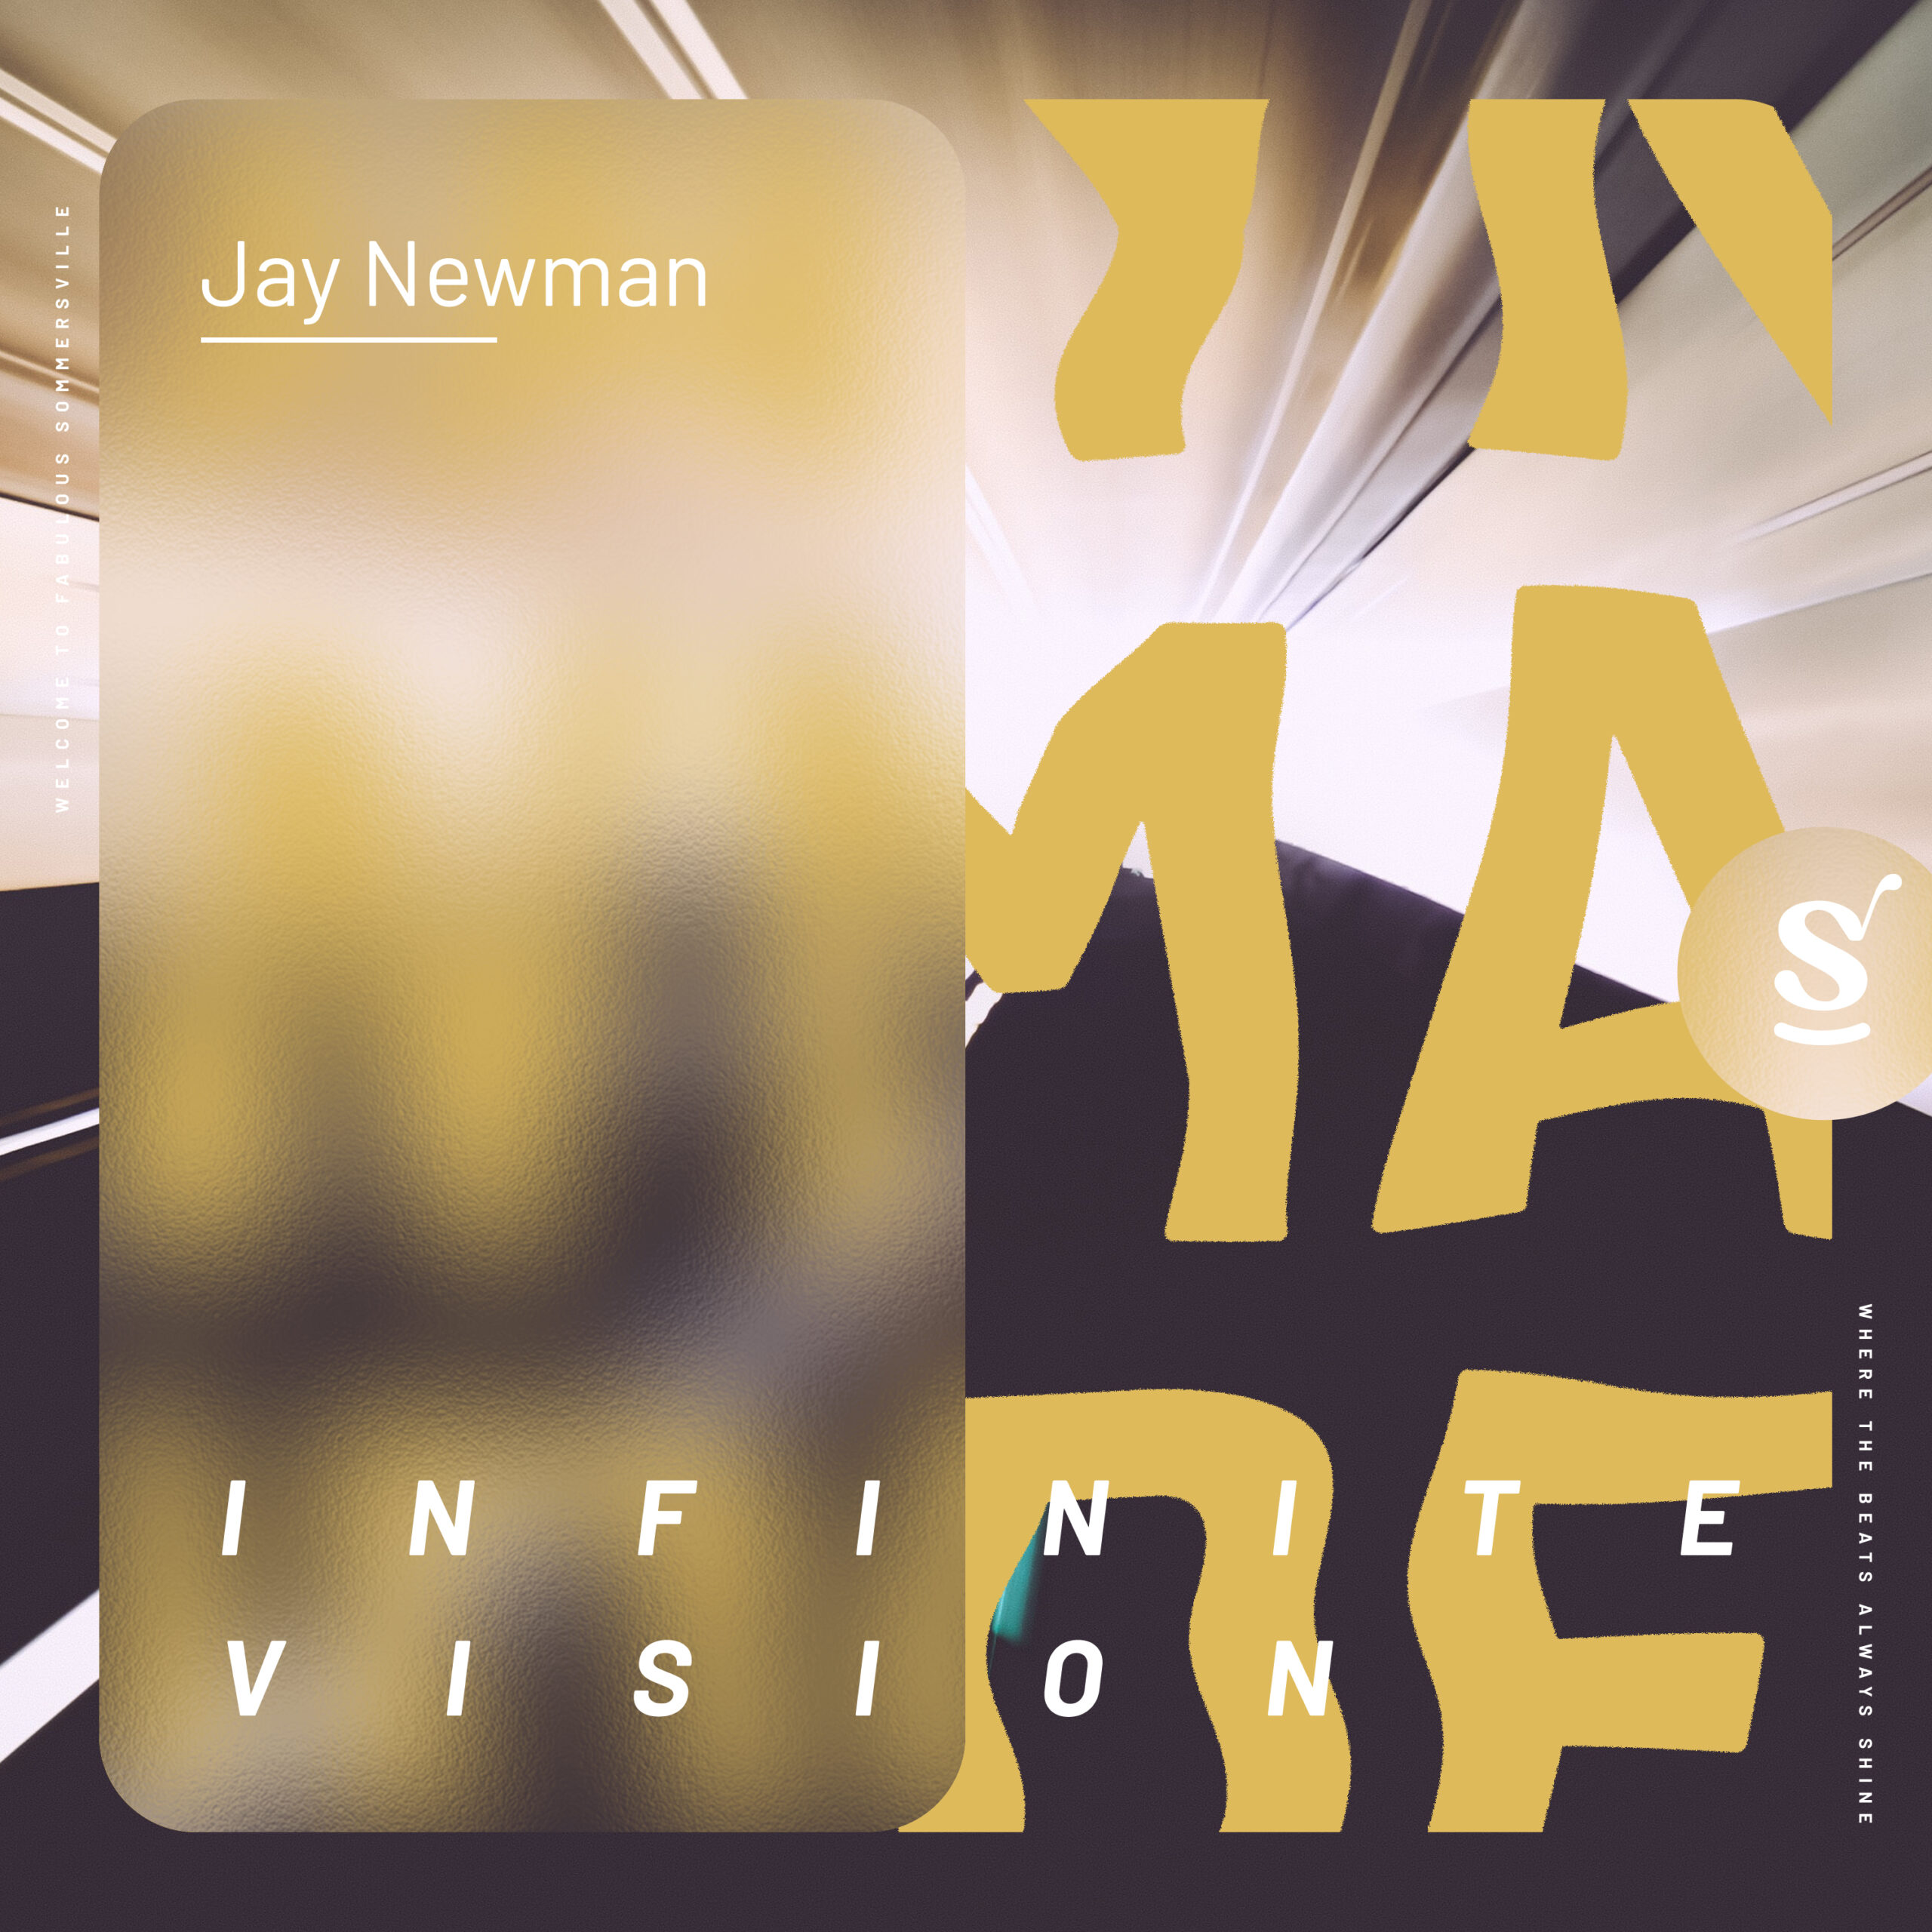 Presenting Jay Newman's Fresh New Release, 'Infinite Vision'